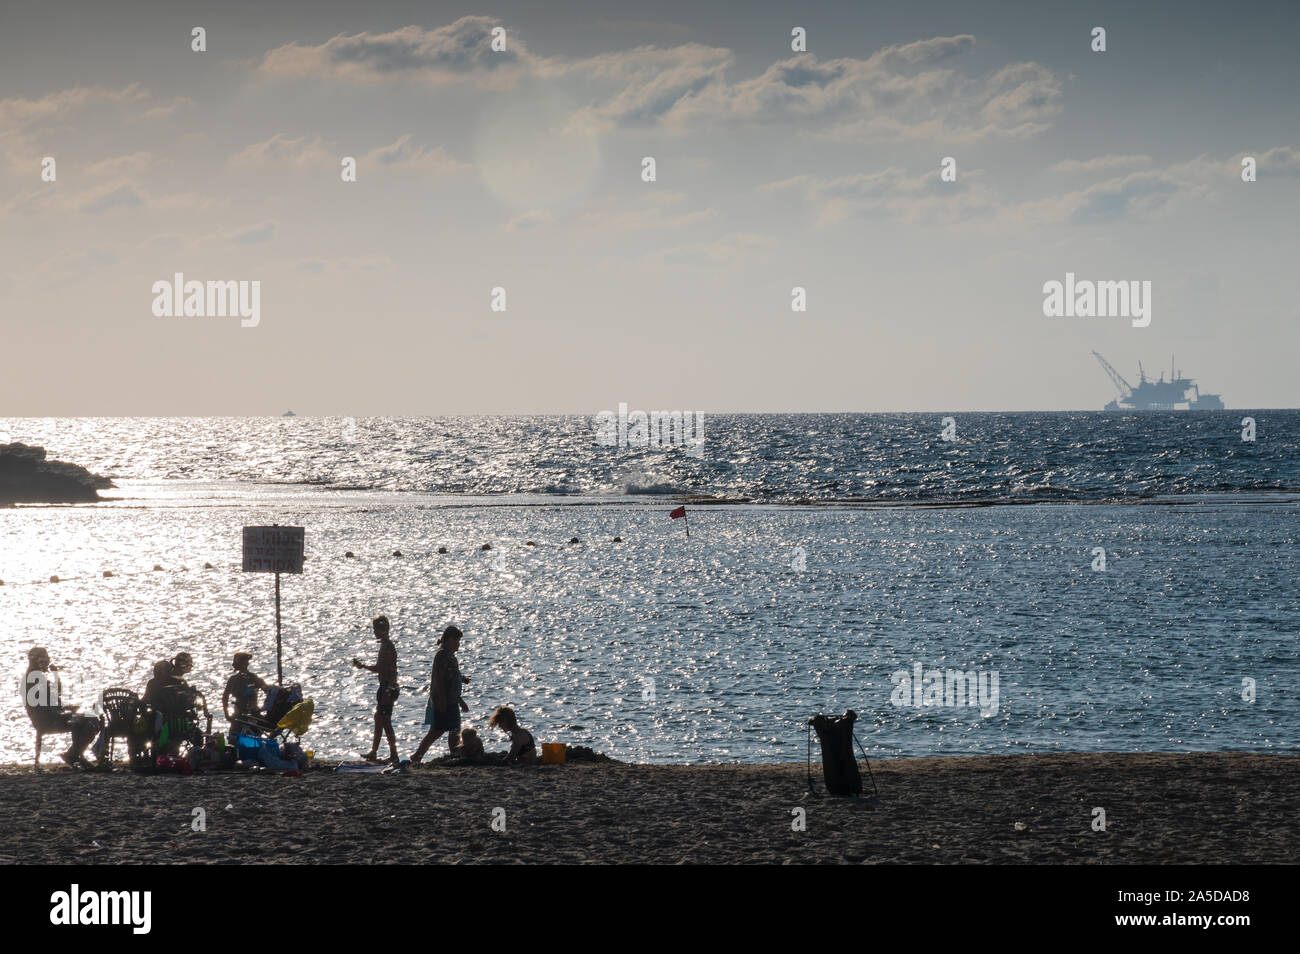 DOR BEACH, ISRAEL / 18 OCT 2019: Beachgoers relaxing on beach in front of environmentally controversial offshore drilling platform in the background. Stock Photo